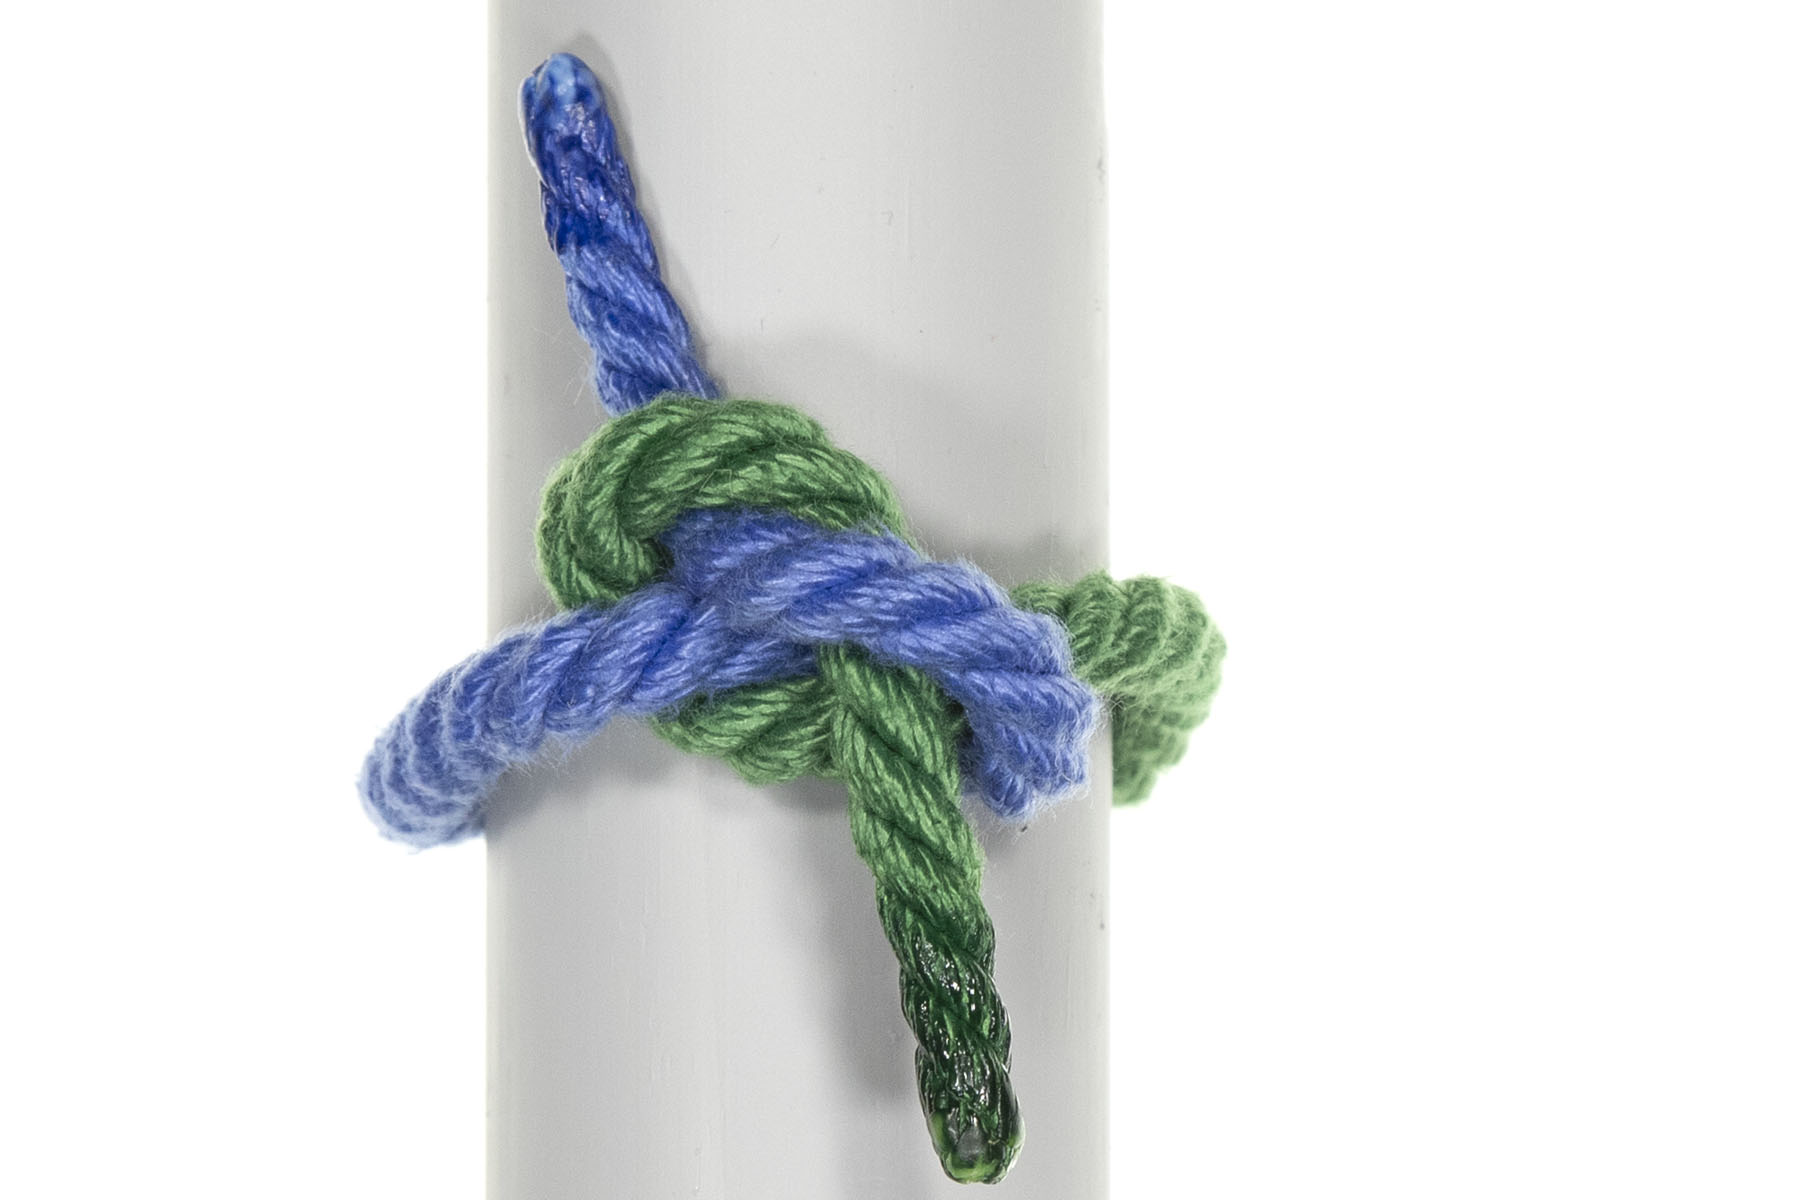 This is a granny knot, which looks much more jumbled than the square knot. It does not lie flat on the pole, and the working ends exit the knot at 90 degrees from the standing parts, rather than lying flat next to them.